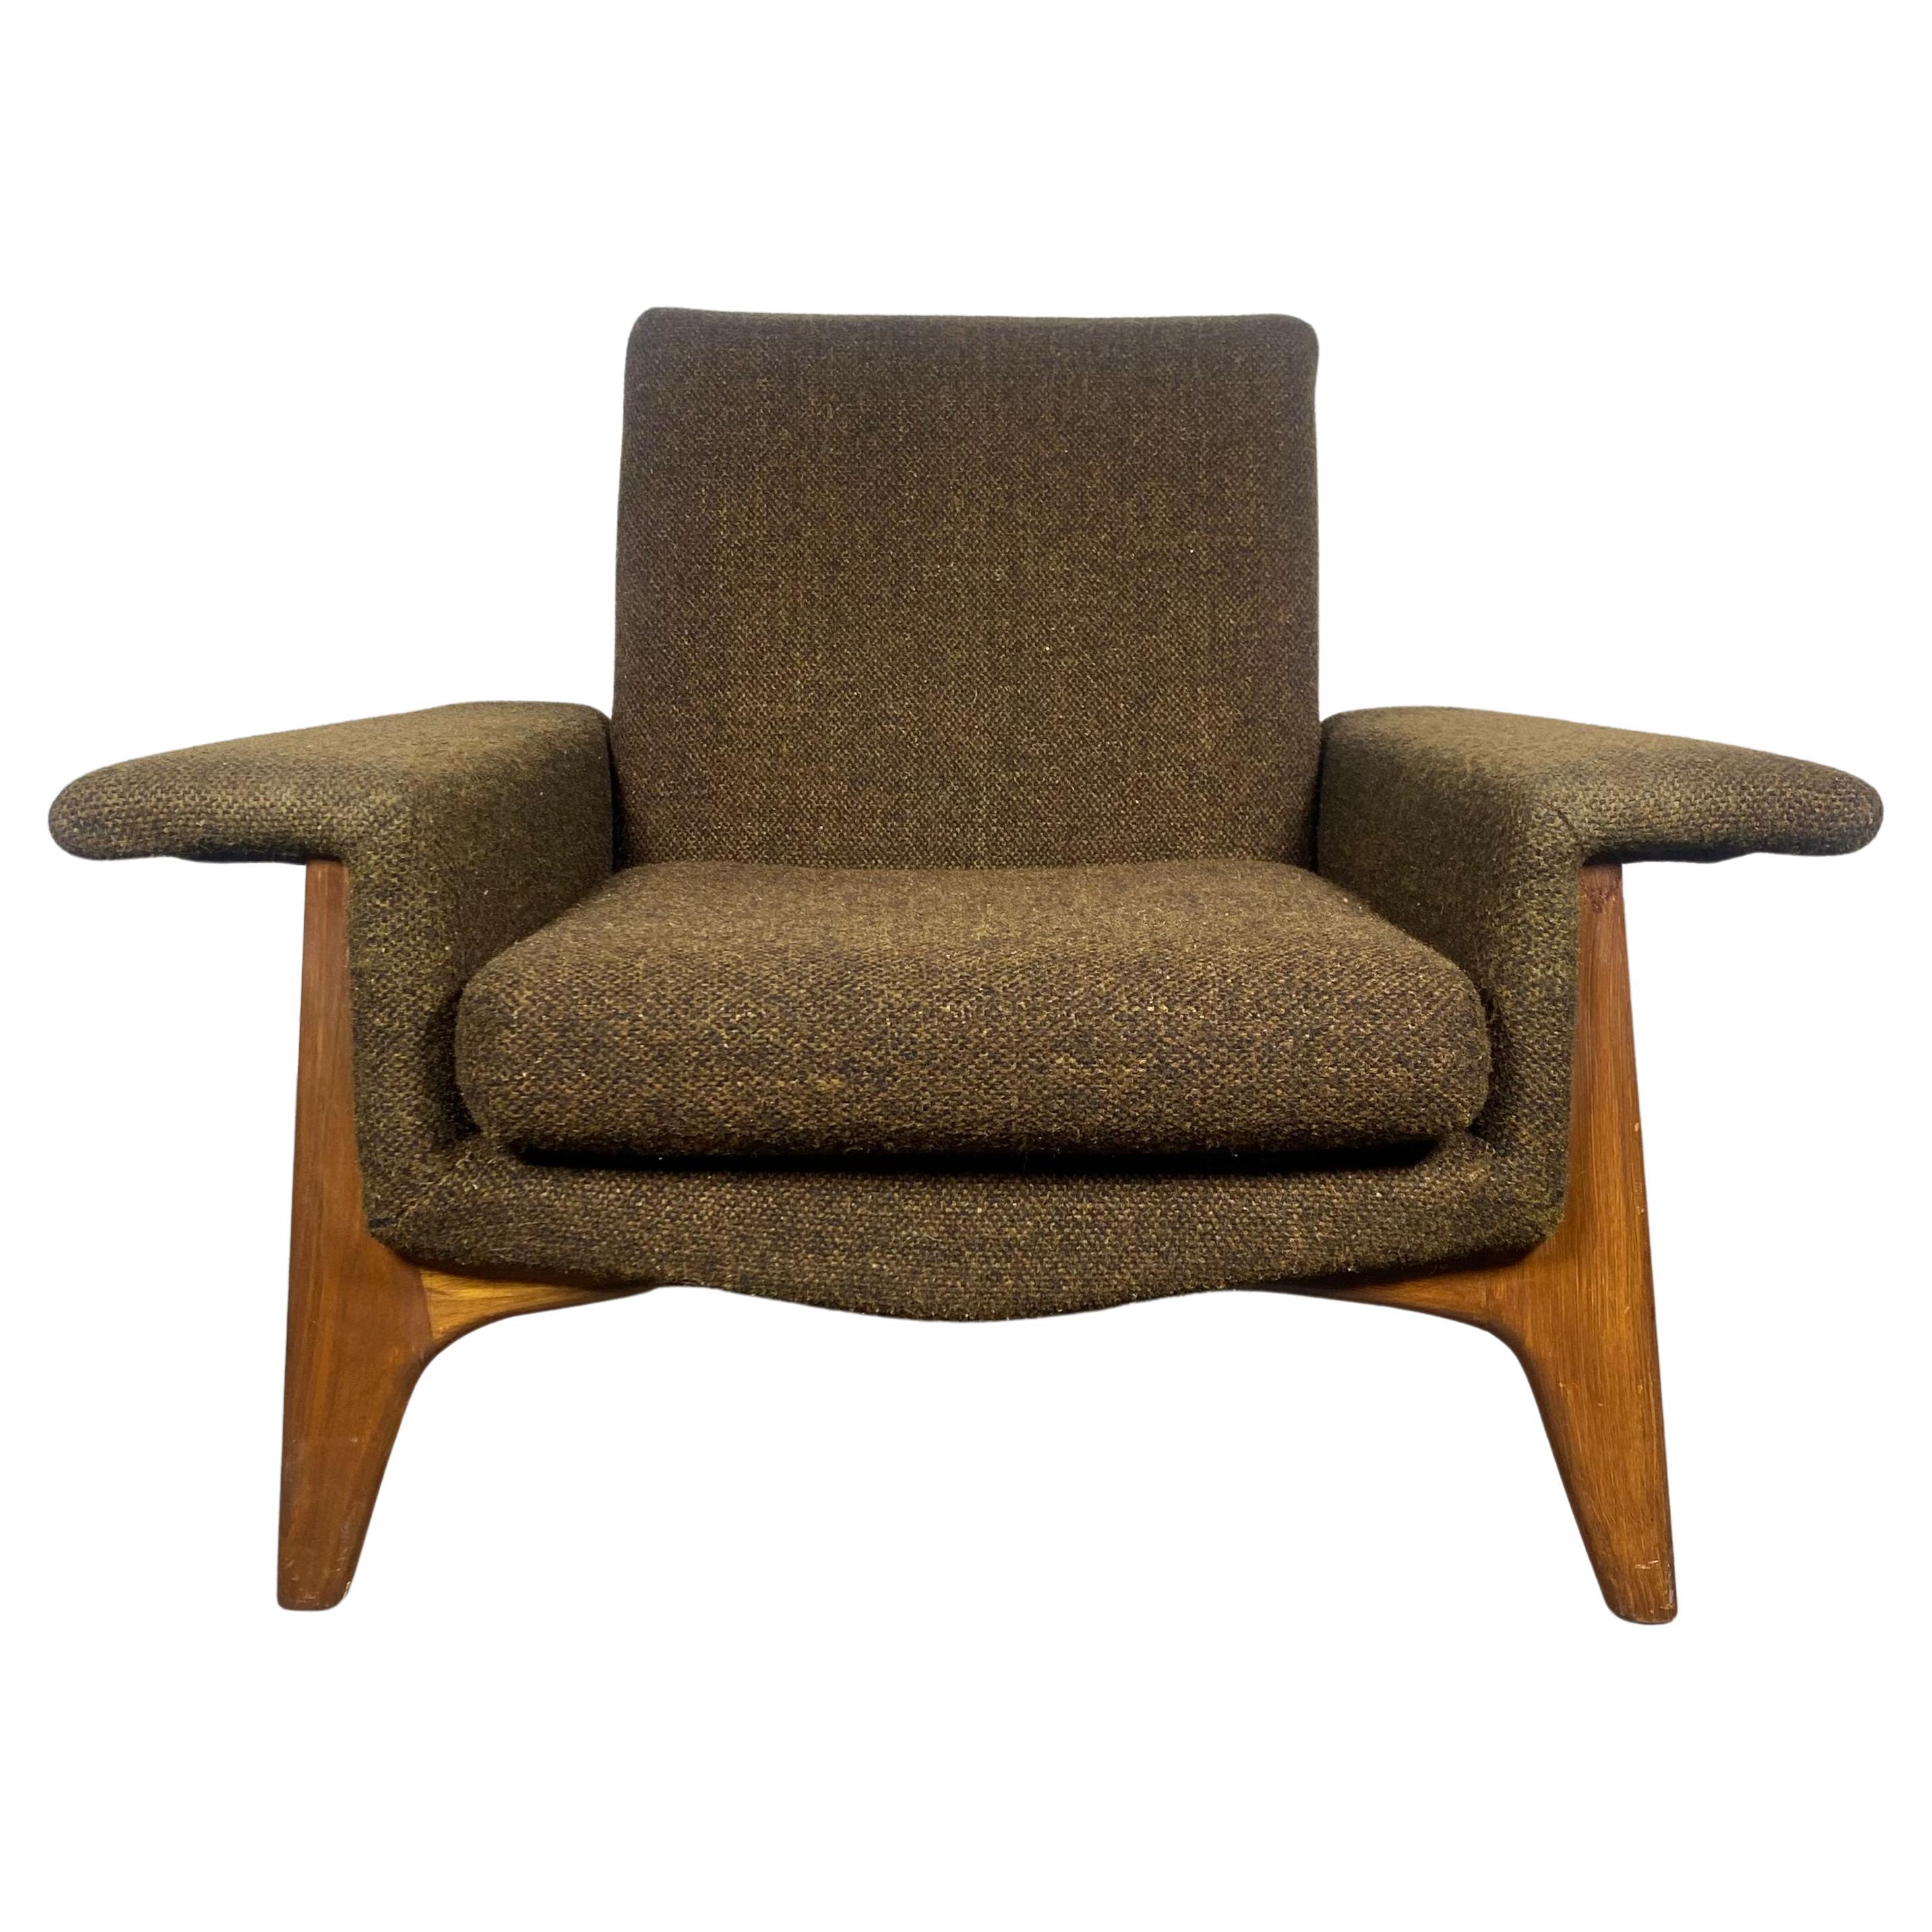 Dramatic Modernist Lounge Chair by Adrian Pearsall.Sculptural Walnut Base.